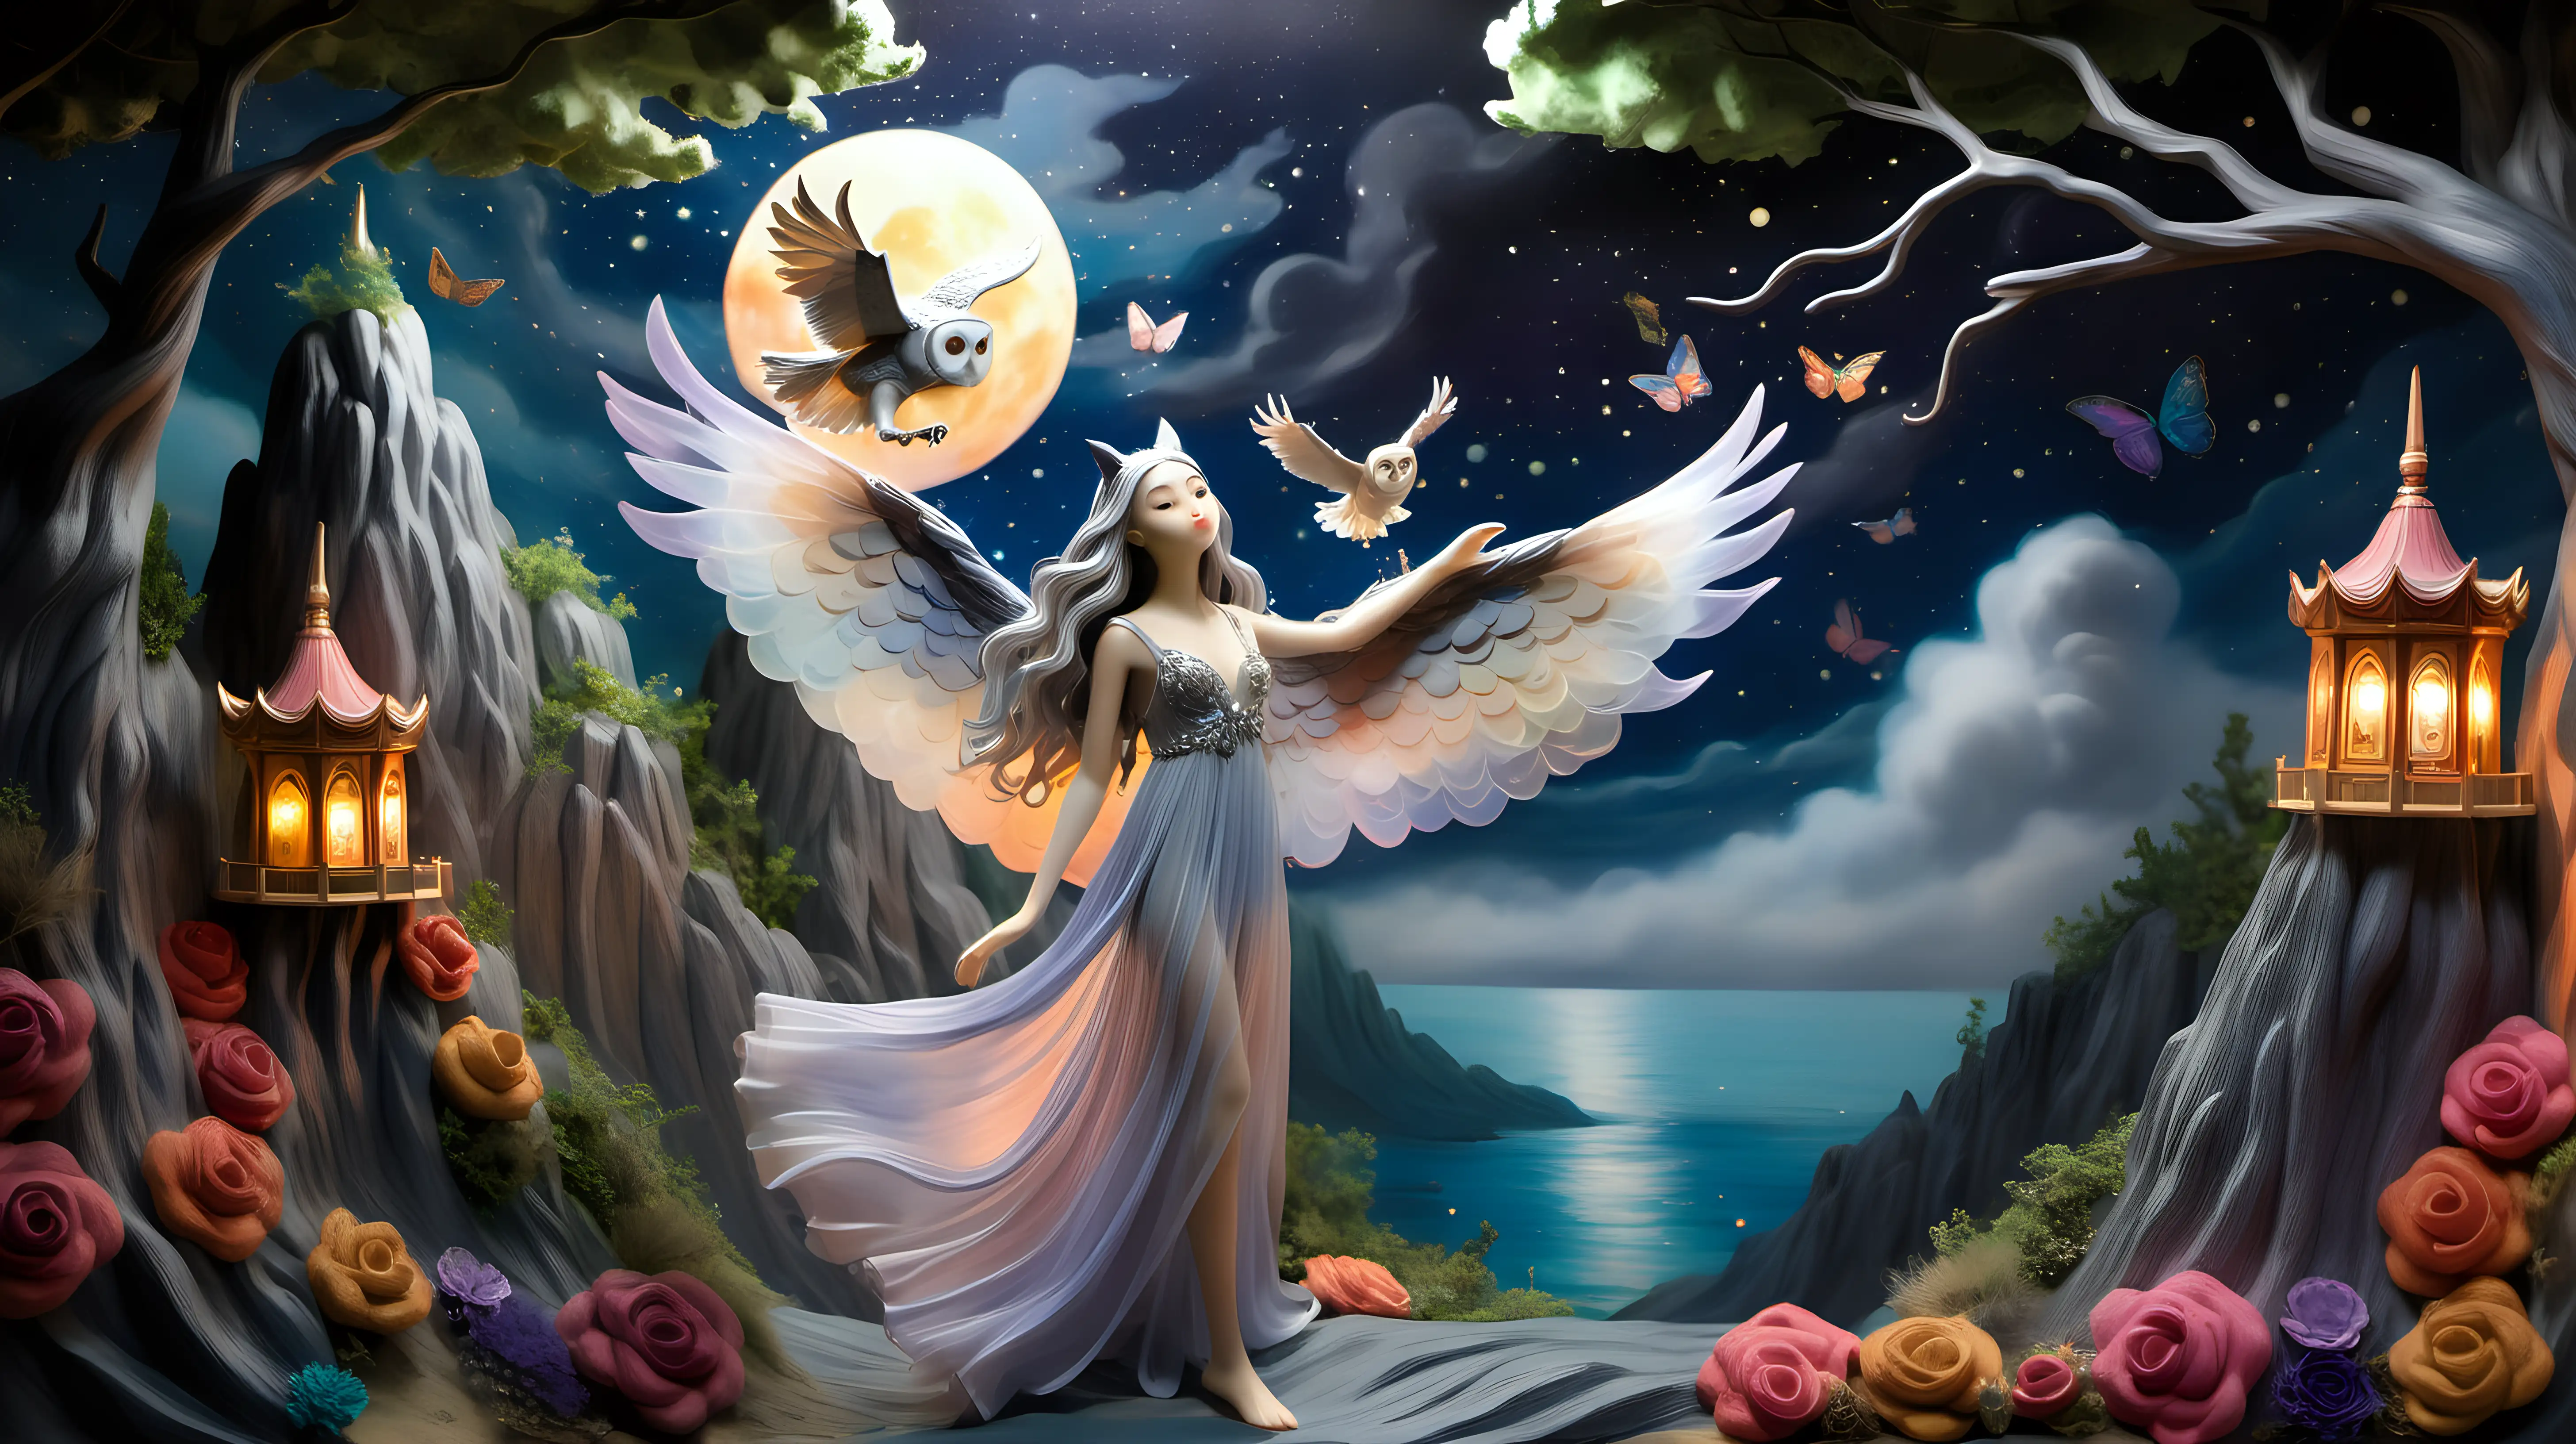 DIORAMA, ghibli inspired painting  of beautiful enchanting slender, long silver wavy hair, sheer flowy dress, 18 YEAR OLD girl who shape-shifts into an owl, ethereal owl princess, playing with a big colorful owl in an enchanted forest skyline, flowers, fireflies and moonlight, sea of clouds, mountain, temple, colorful, cliff